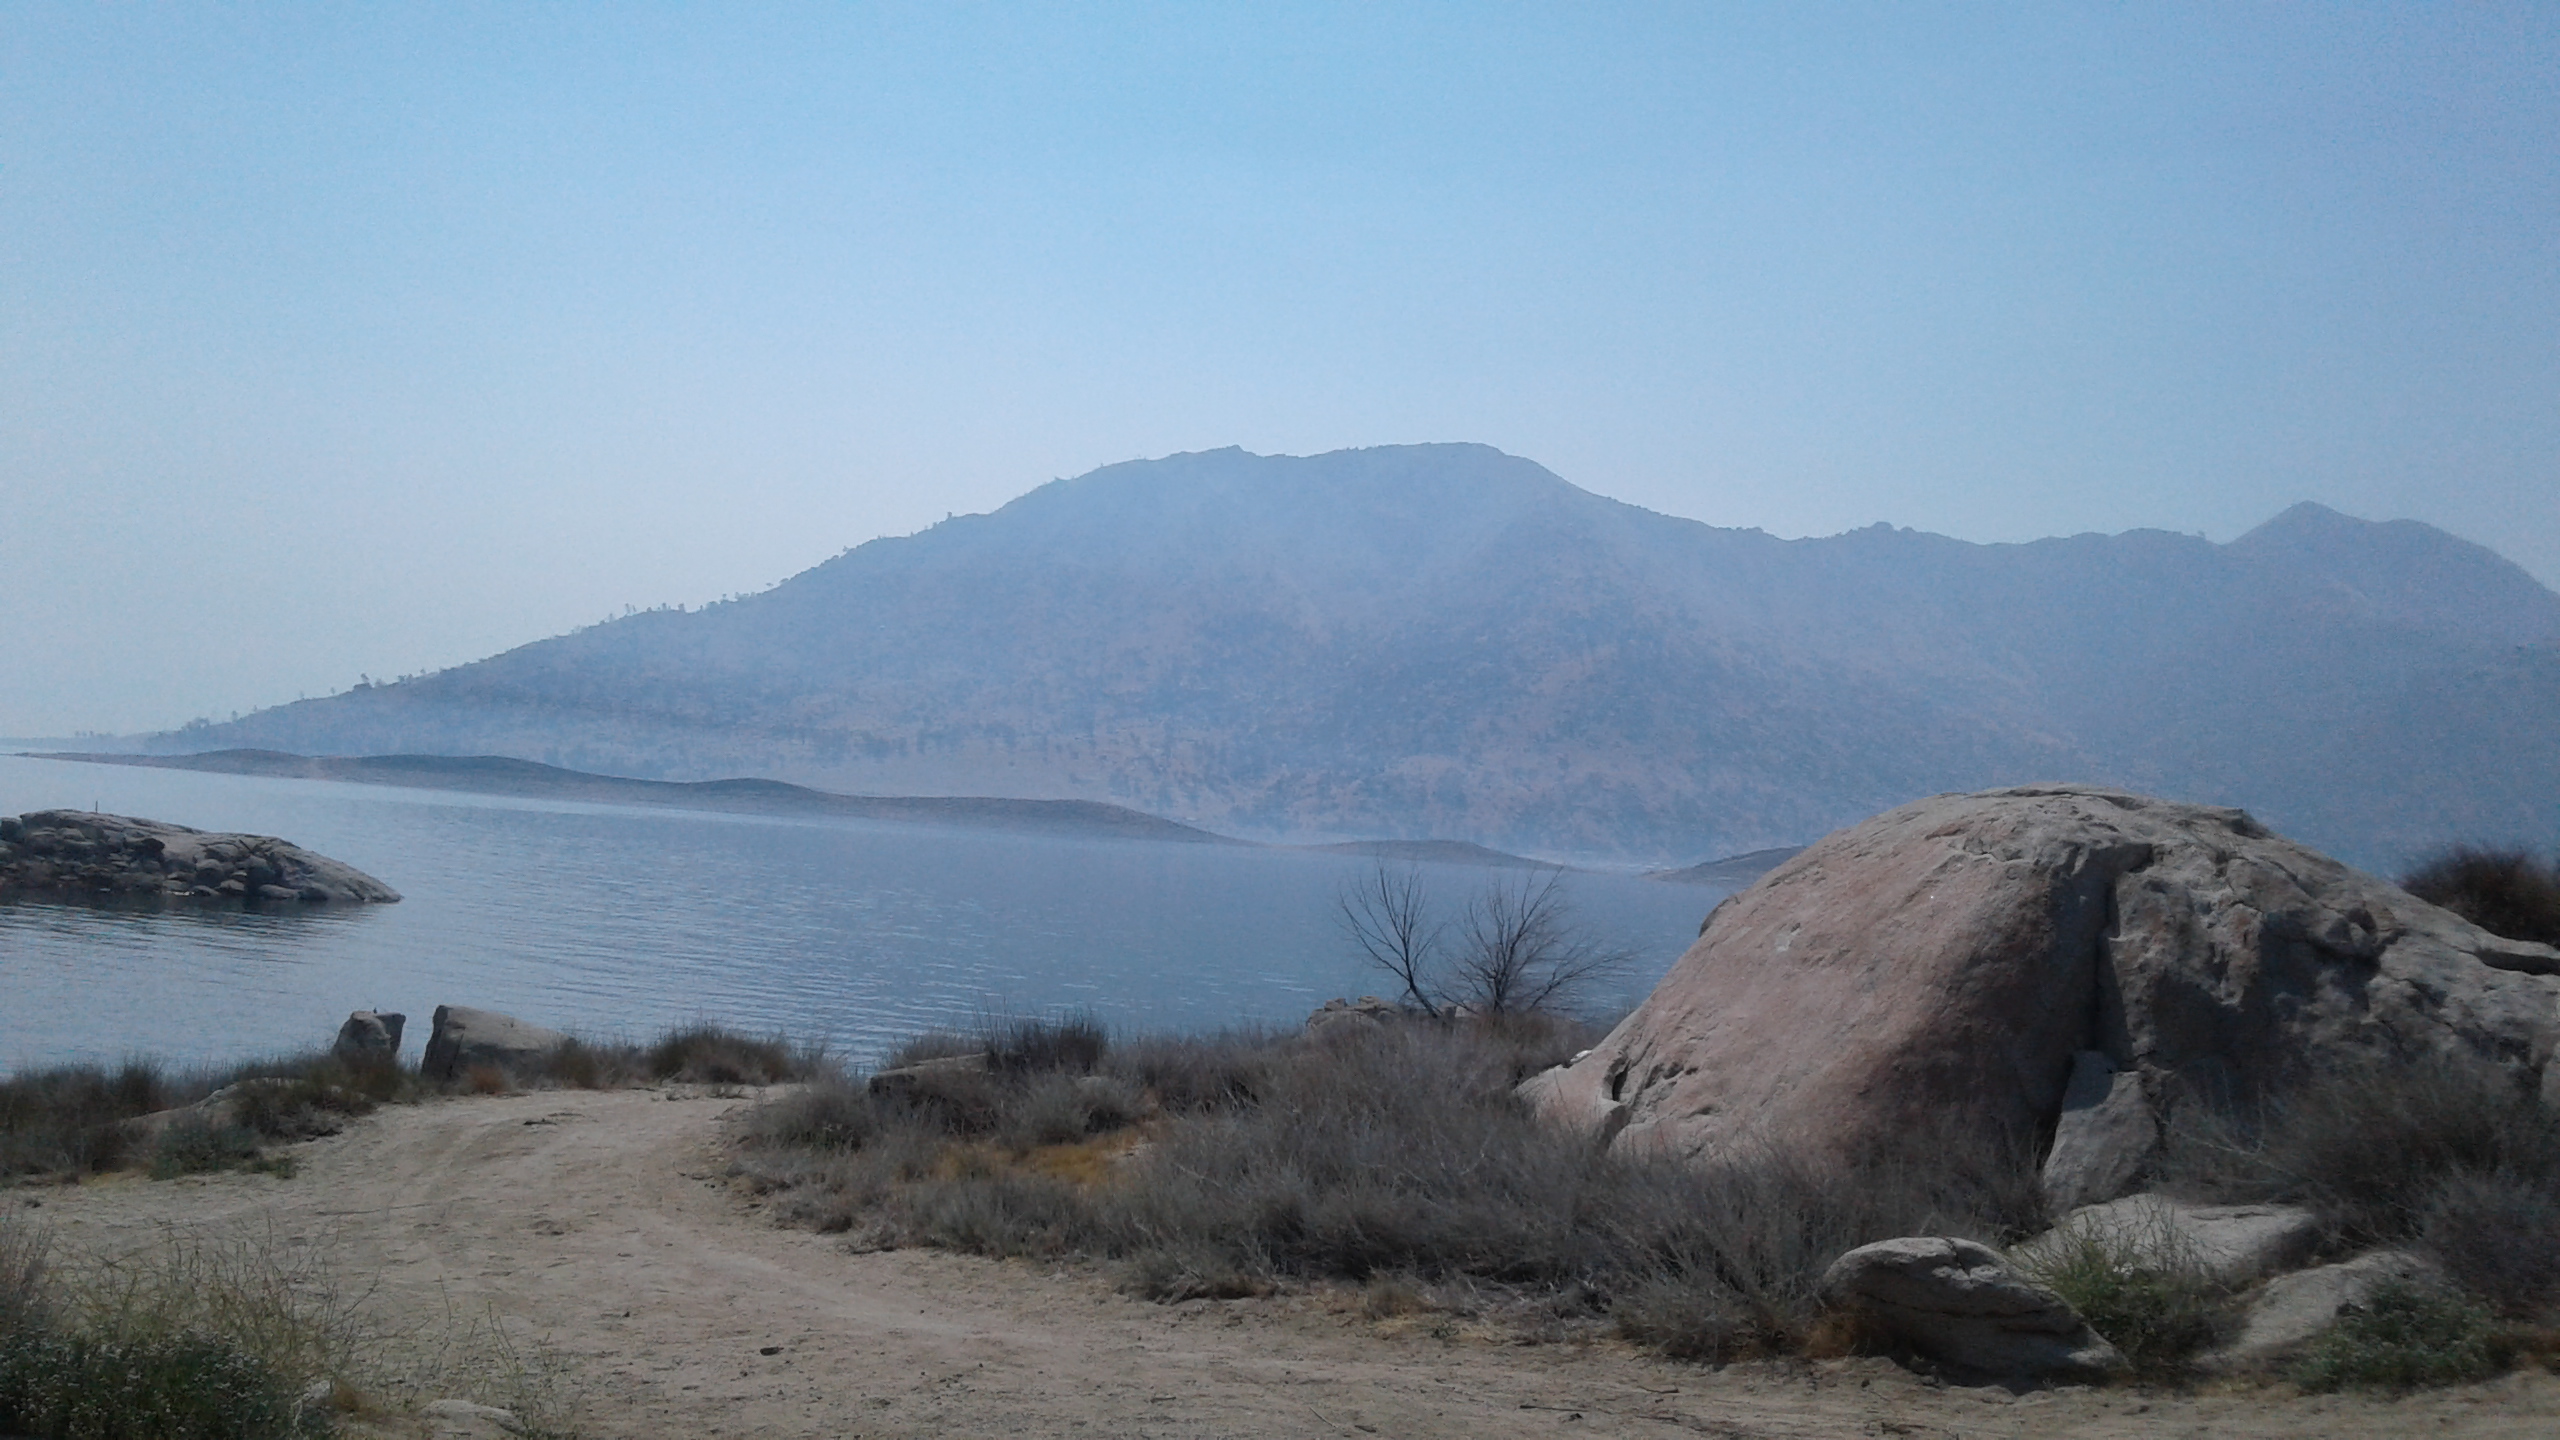 My Visit to the Sierras: Lake Isabella for July 4th